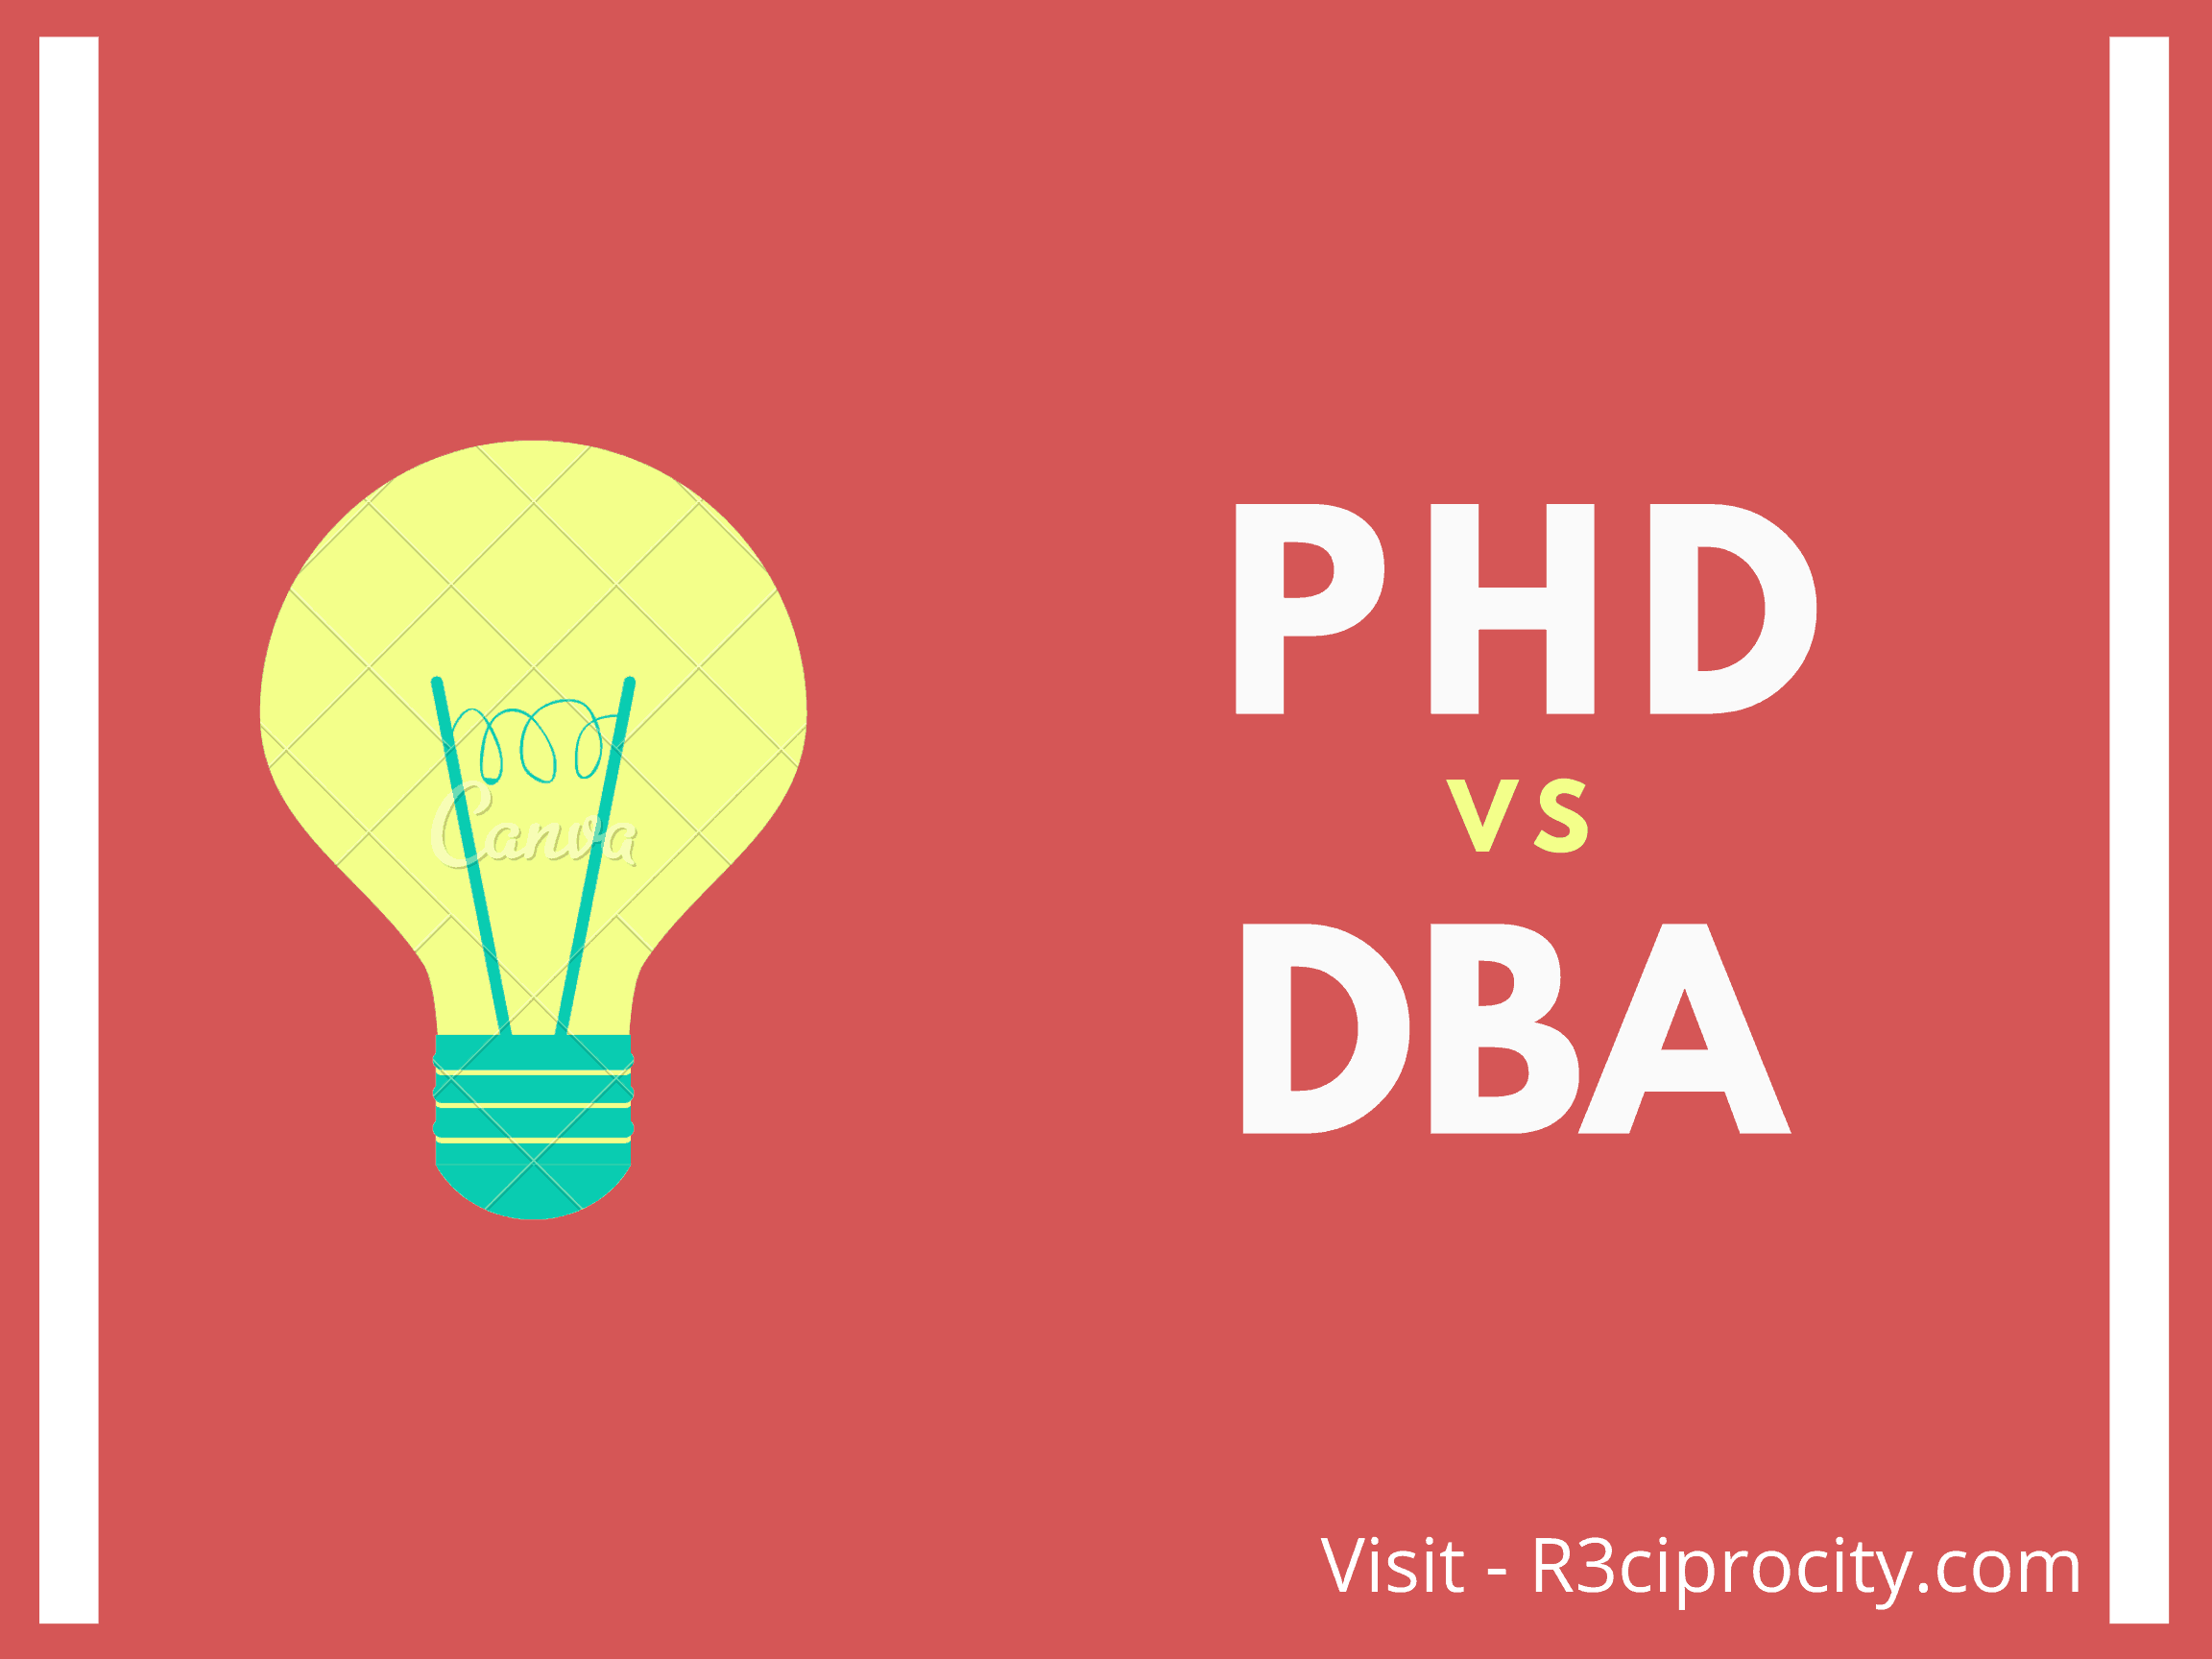 which one is better dba or phd